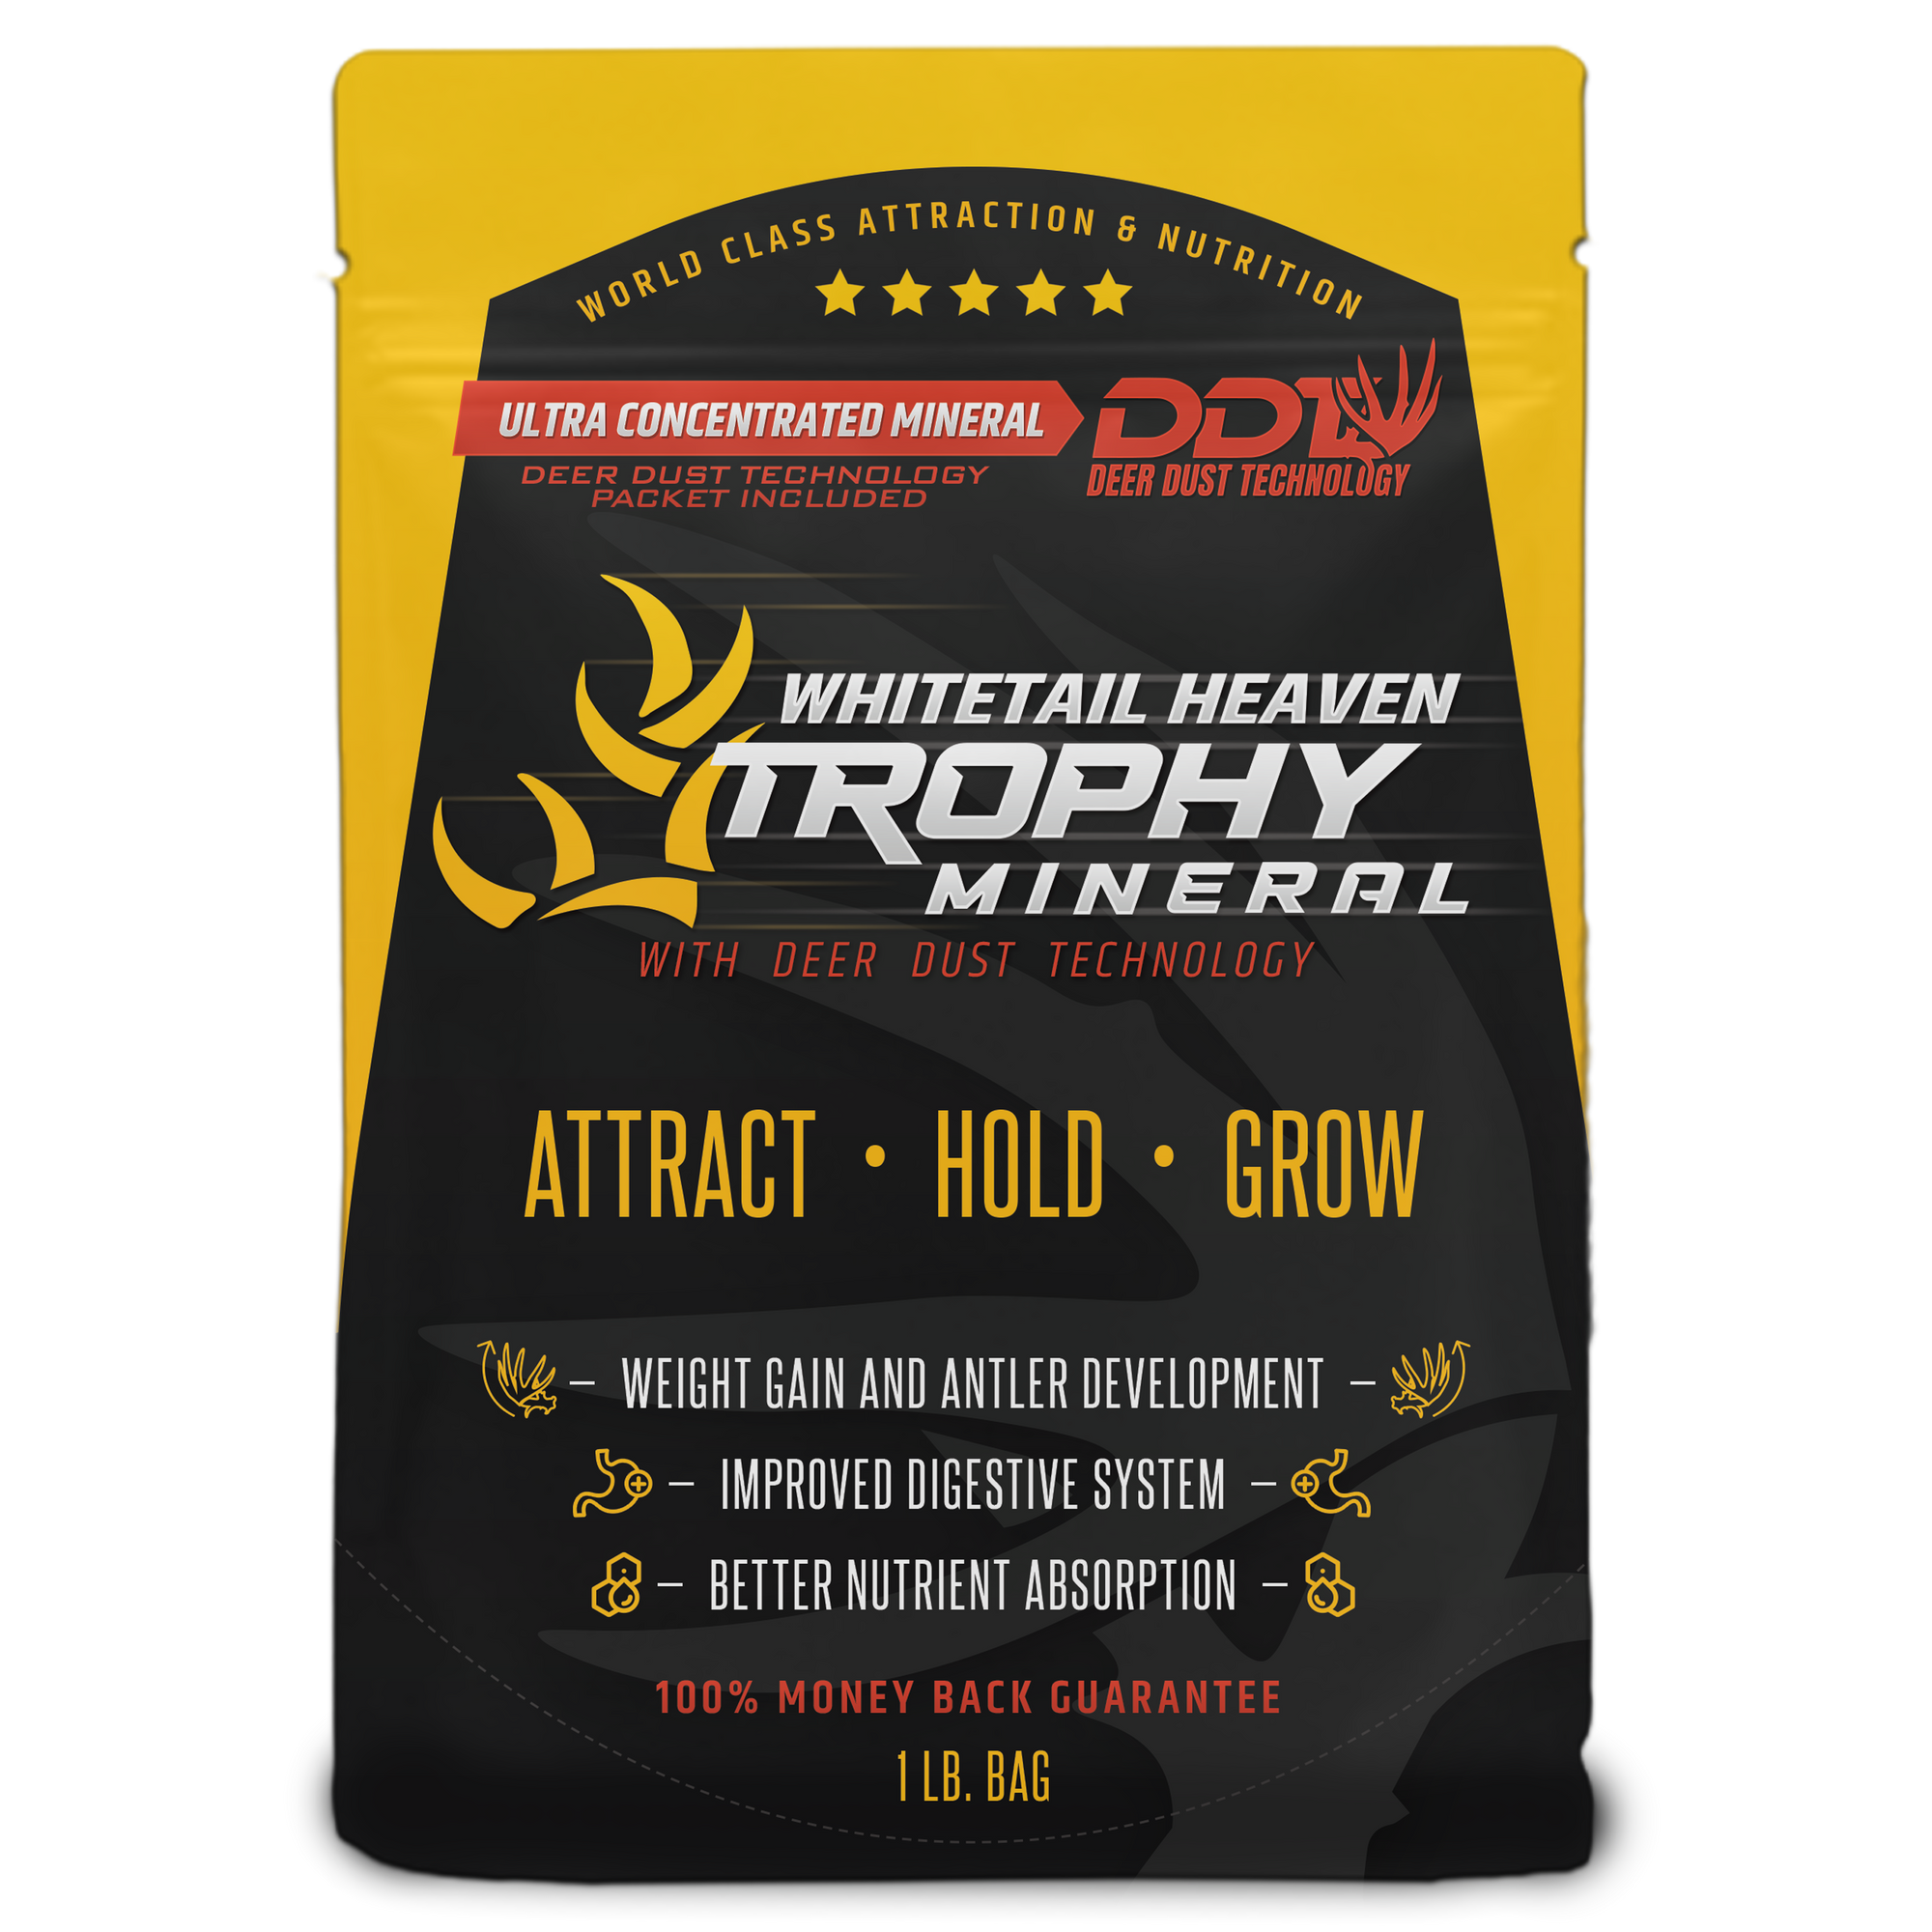 best deer minerals for antler growth is whitetail heaven trophy mineral